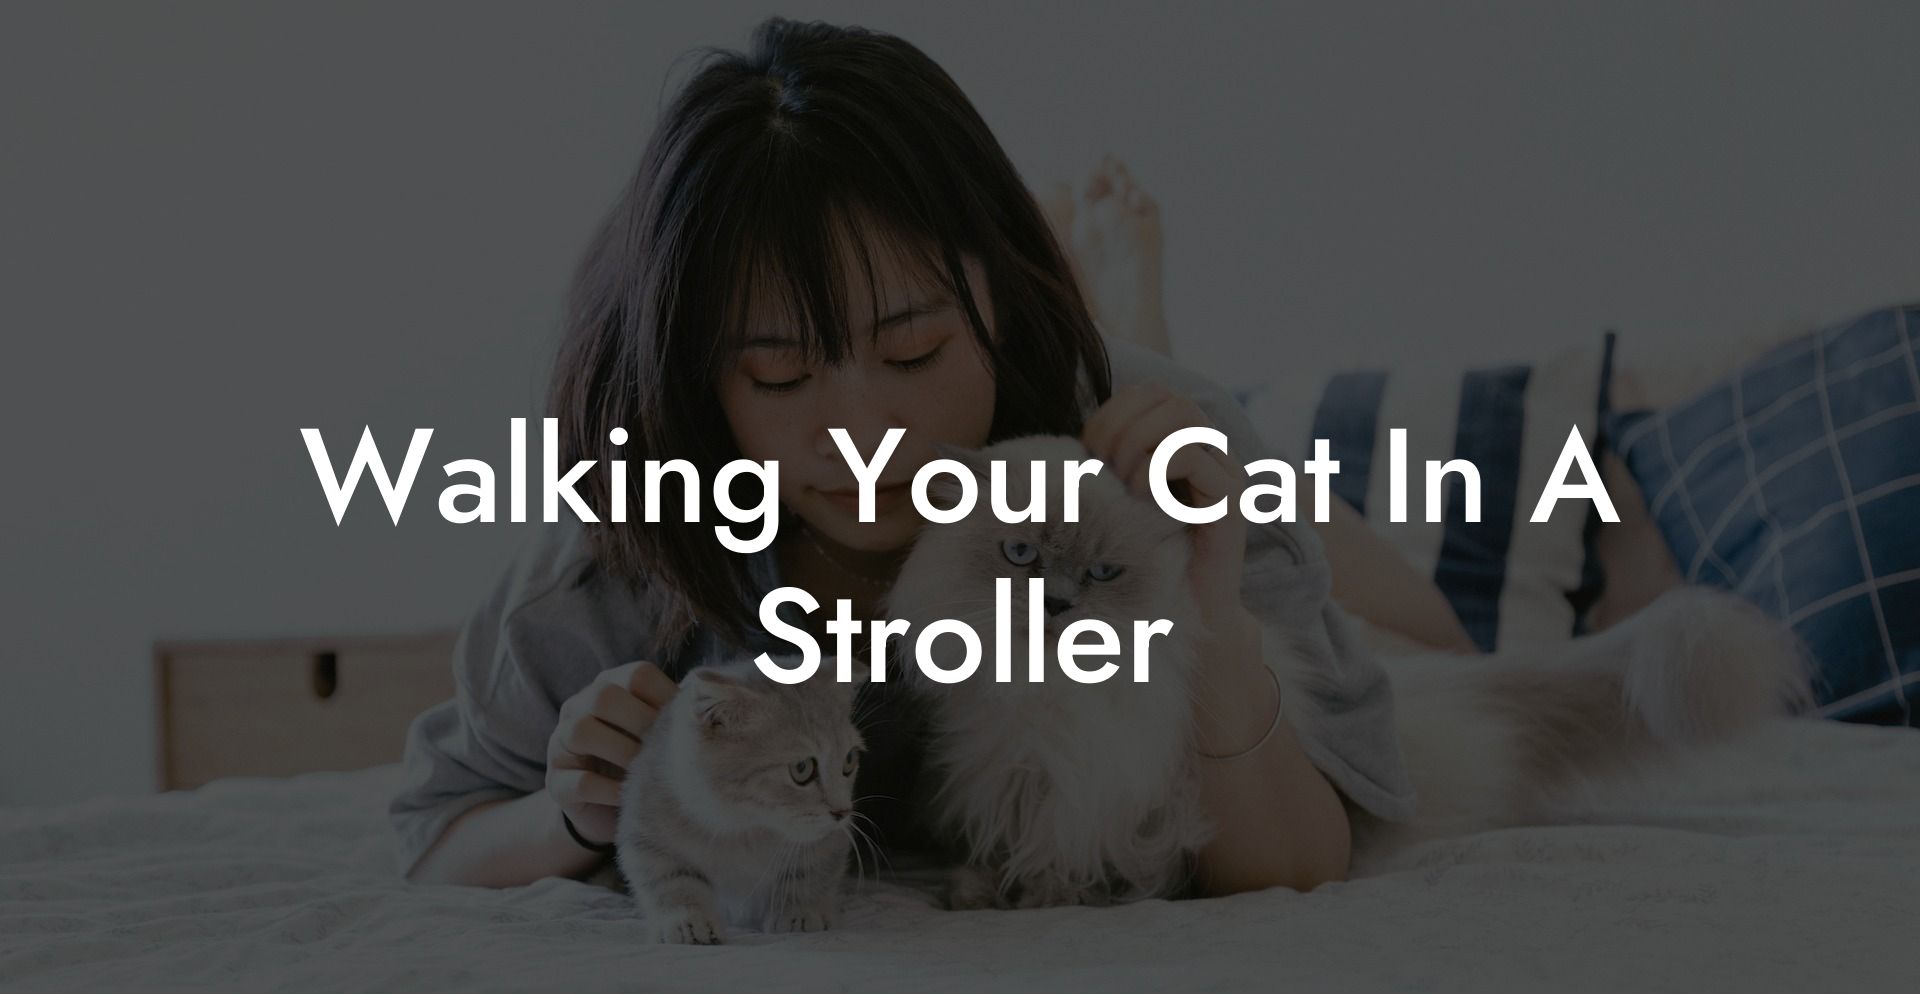 Walking Your Cat In A Stroller